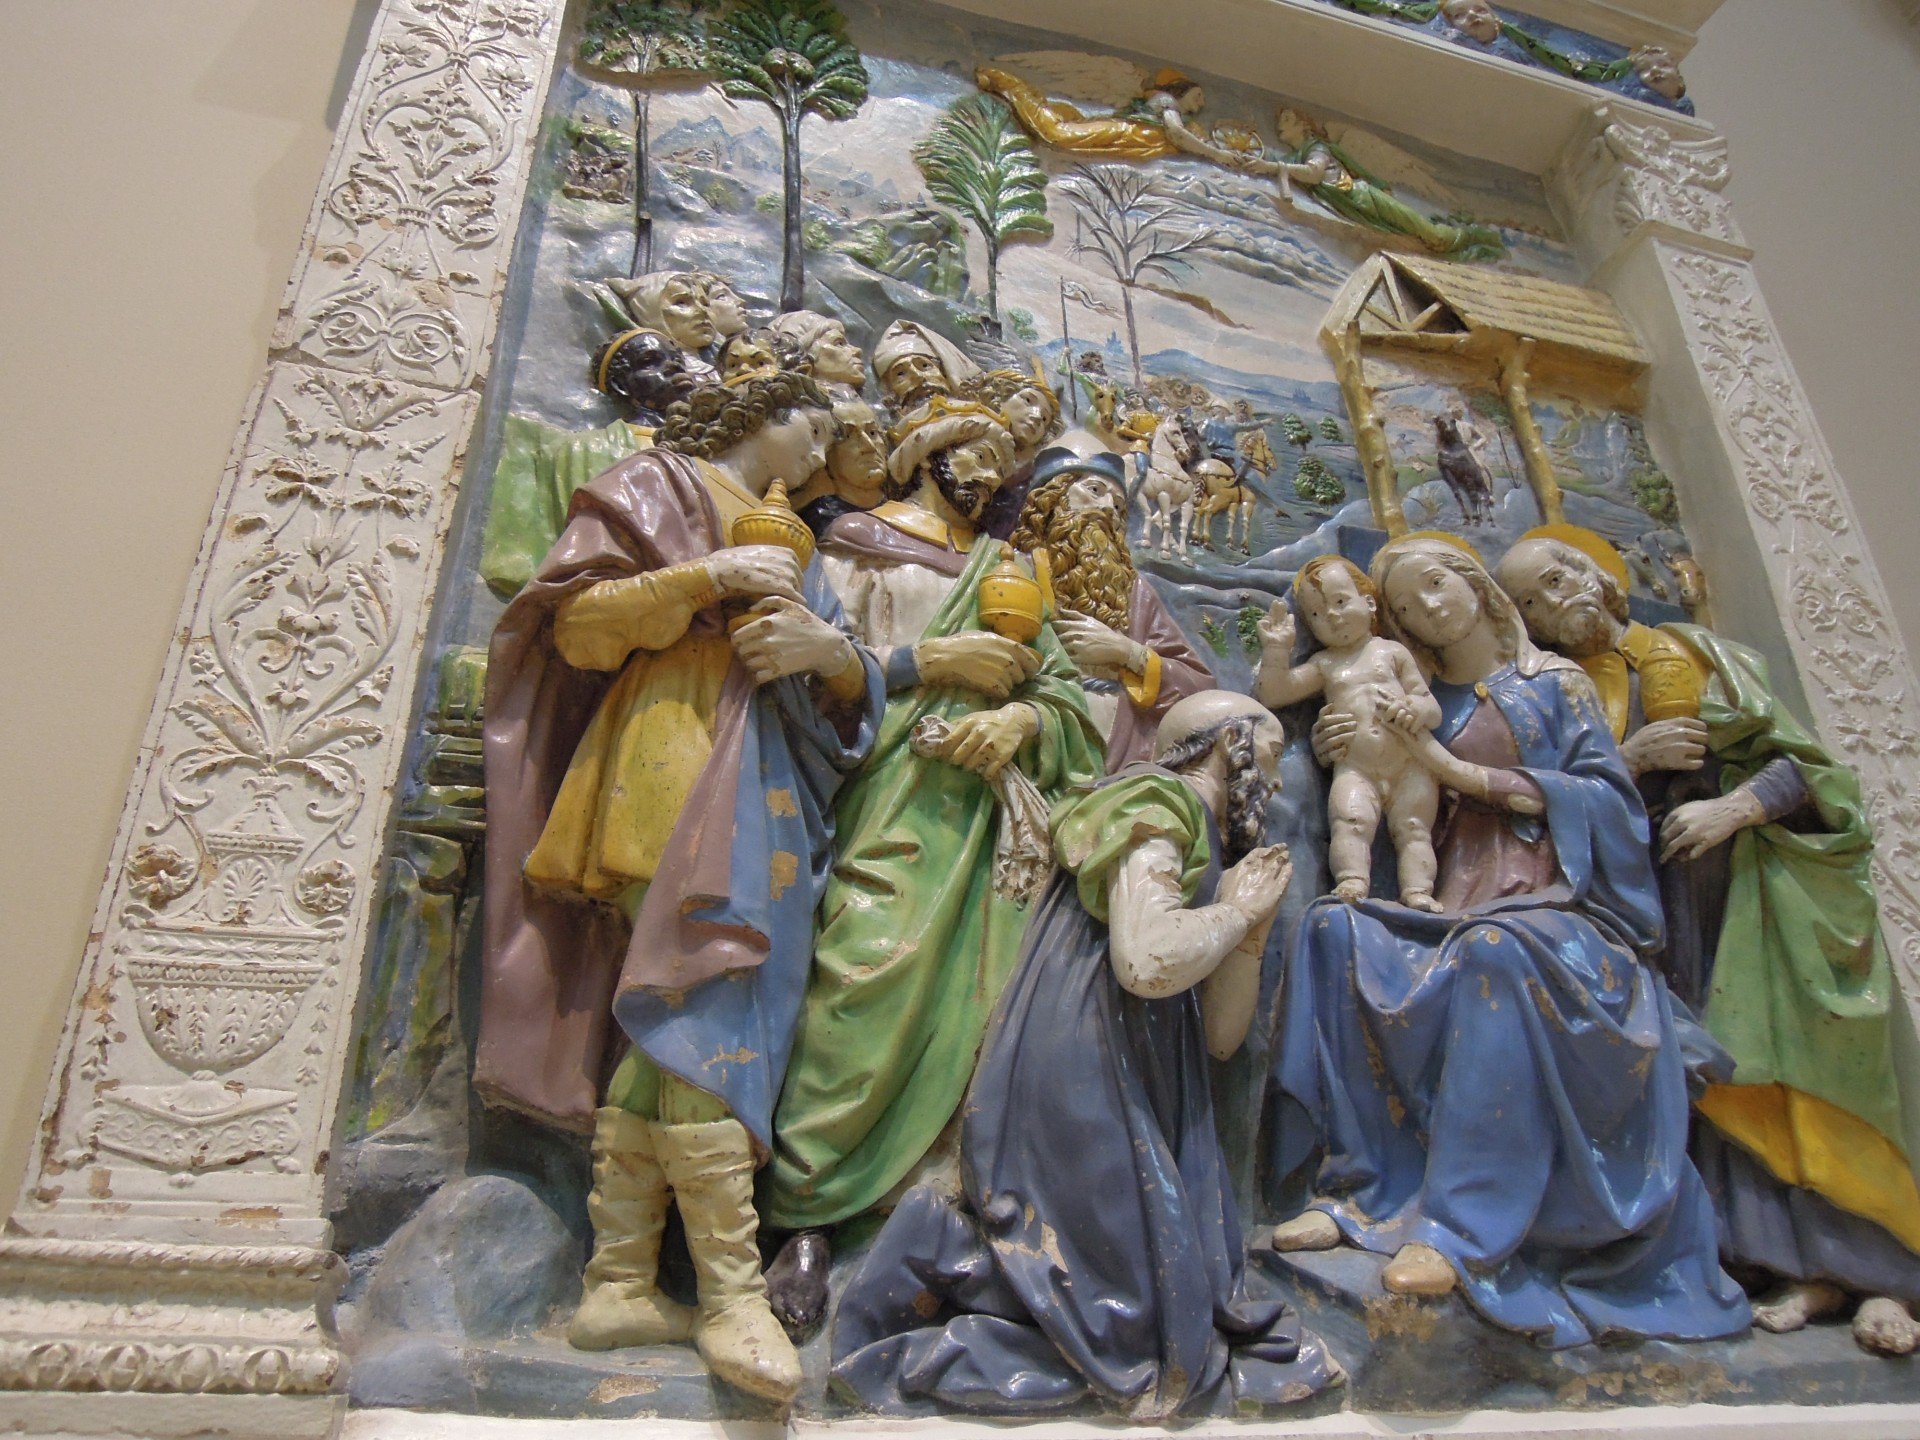 "The adoration of the King", about 1500-10, Enamelled terracotta, Andrea Della Robbia, 1435-1525